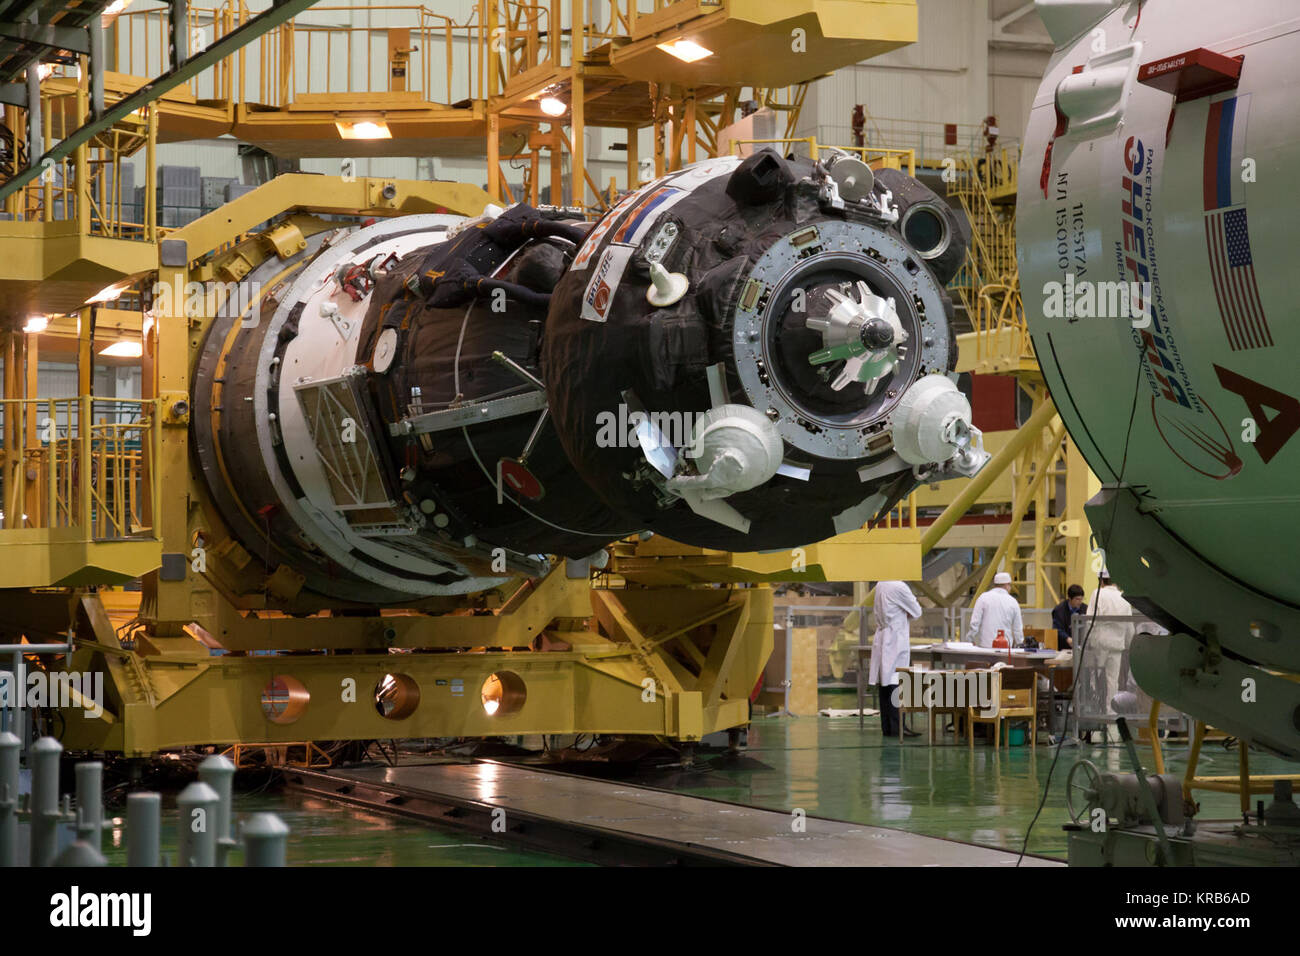 In the Integration Facility at the Baikonur Cosmodrome in Kazakhstan, the Soyuz TMA-07M spacecraft is moved into place for its encapsulation into the upper stage of the Soyuz booster Dec. 12, 2012 as preparations continue for the launch of the Expedition 34/35 crew. The vehicle will be rolled to the launch pad at Baikonur Dec. 17 in advance of the Dec. 19 launch of NASA Flight Engineer Tom Marshburn, Soyuz Commander Roman Romanenko and Flight Engineer Chris Hadfield of the Canadian Space Agency for a five-month mission on the International Space Station. Photo Credit: NASA/Victor Zelentsov Soy Stock Photo